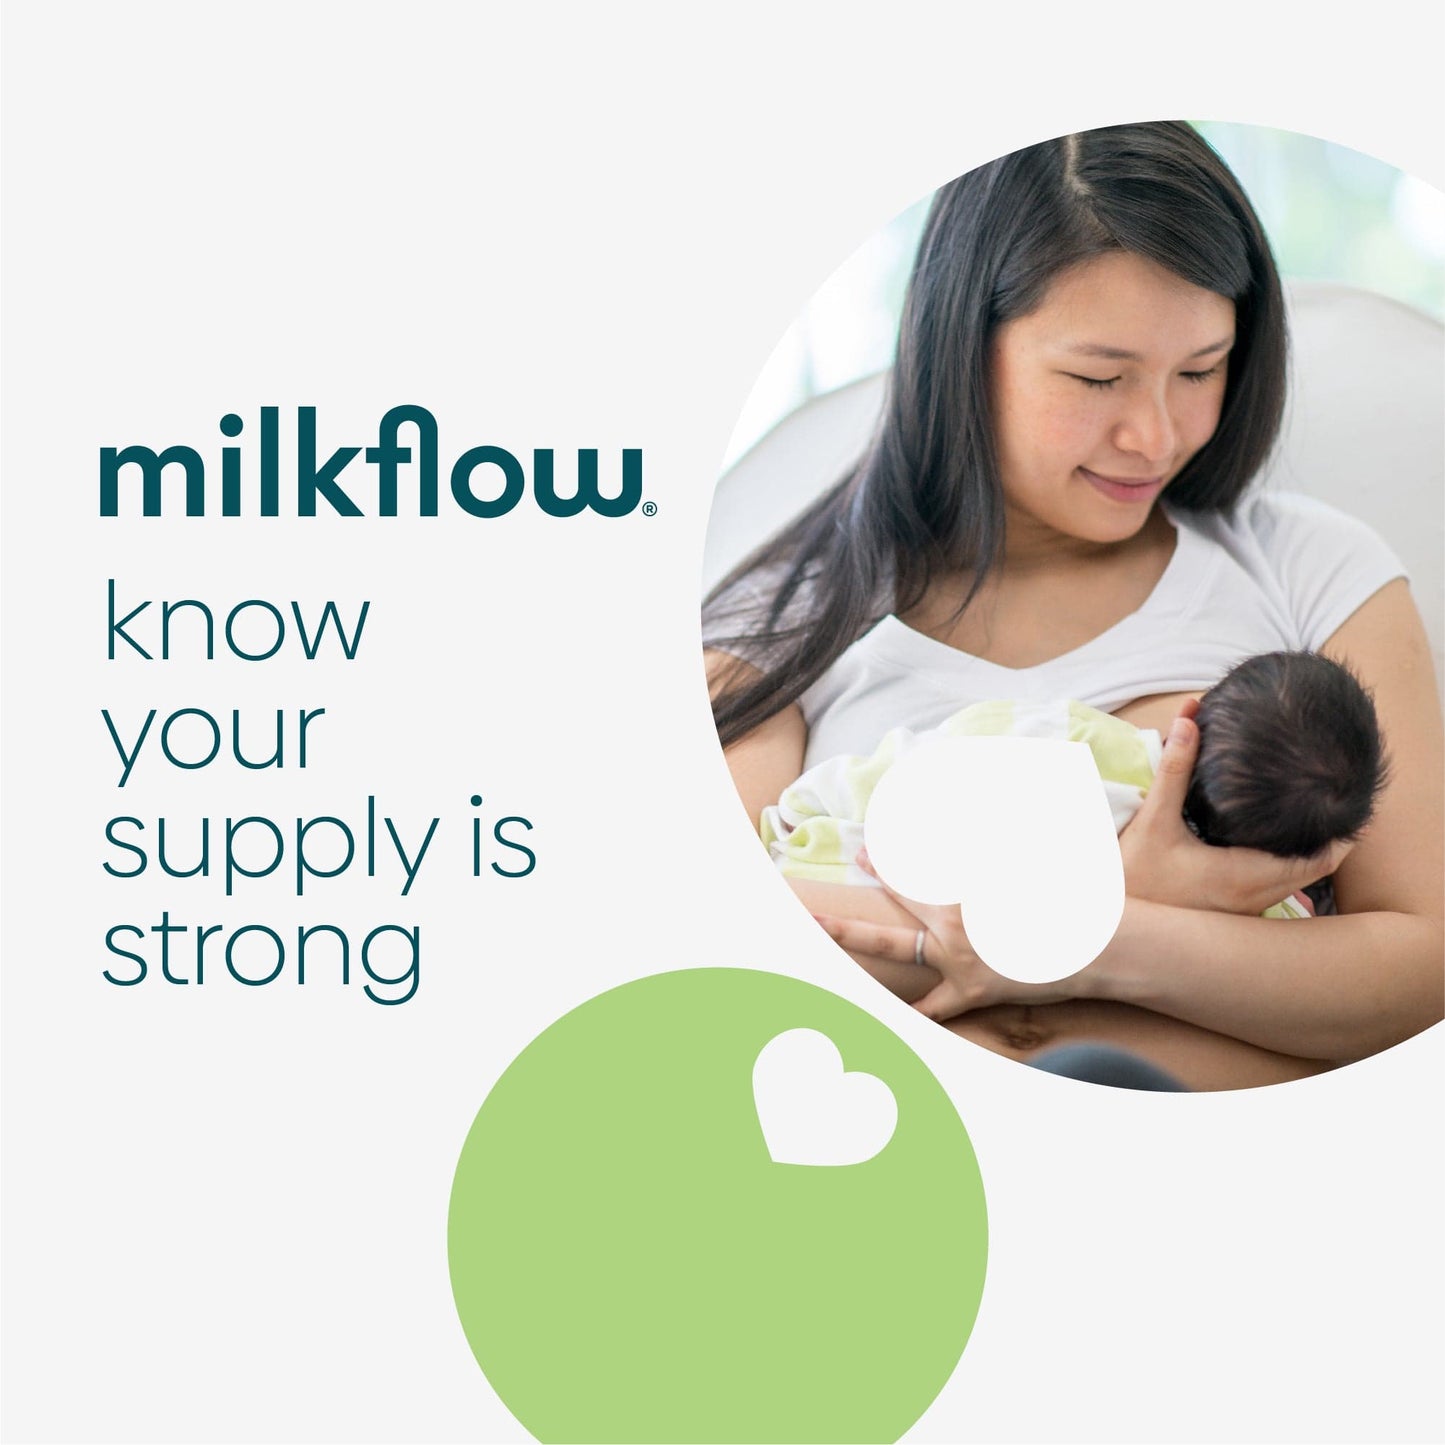 A mother breastfeeds her baby knowing her milk supply is strong